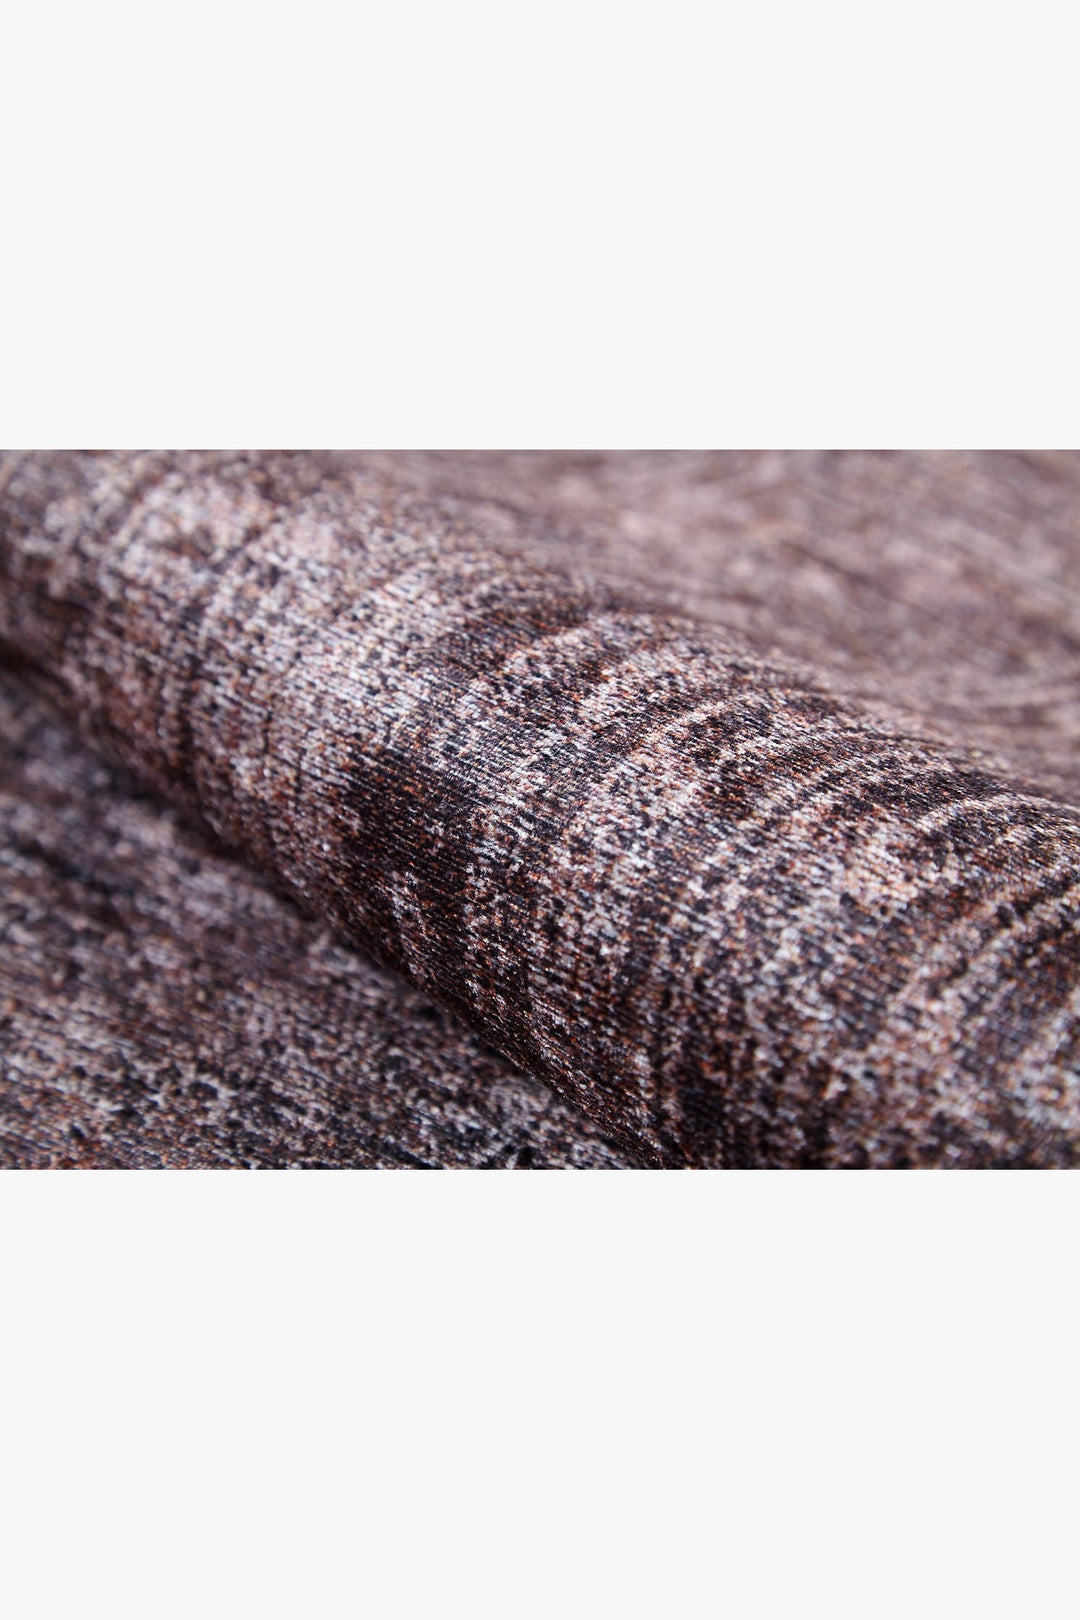 machine-washable-area-rug-Tone-on-Tone-Ombre-Modern-Collection-Bronze-Brown-JR1635